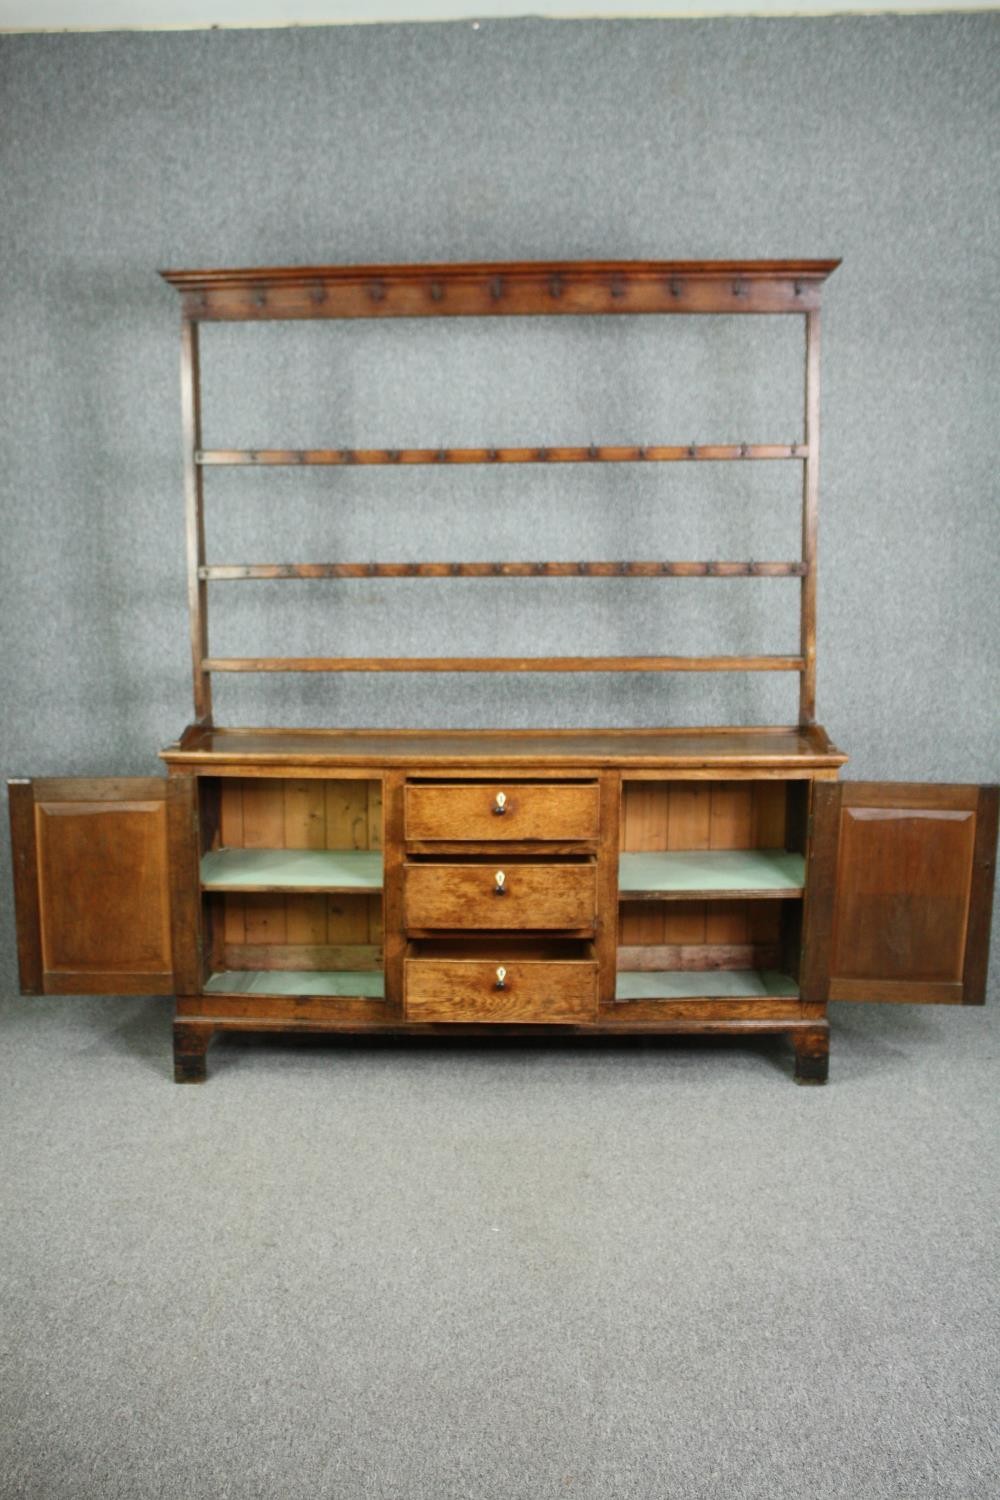 Dresser, 19th century country oak with upper open plate rack above base fitted with drawers - Image 3 of 11